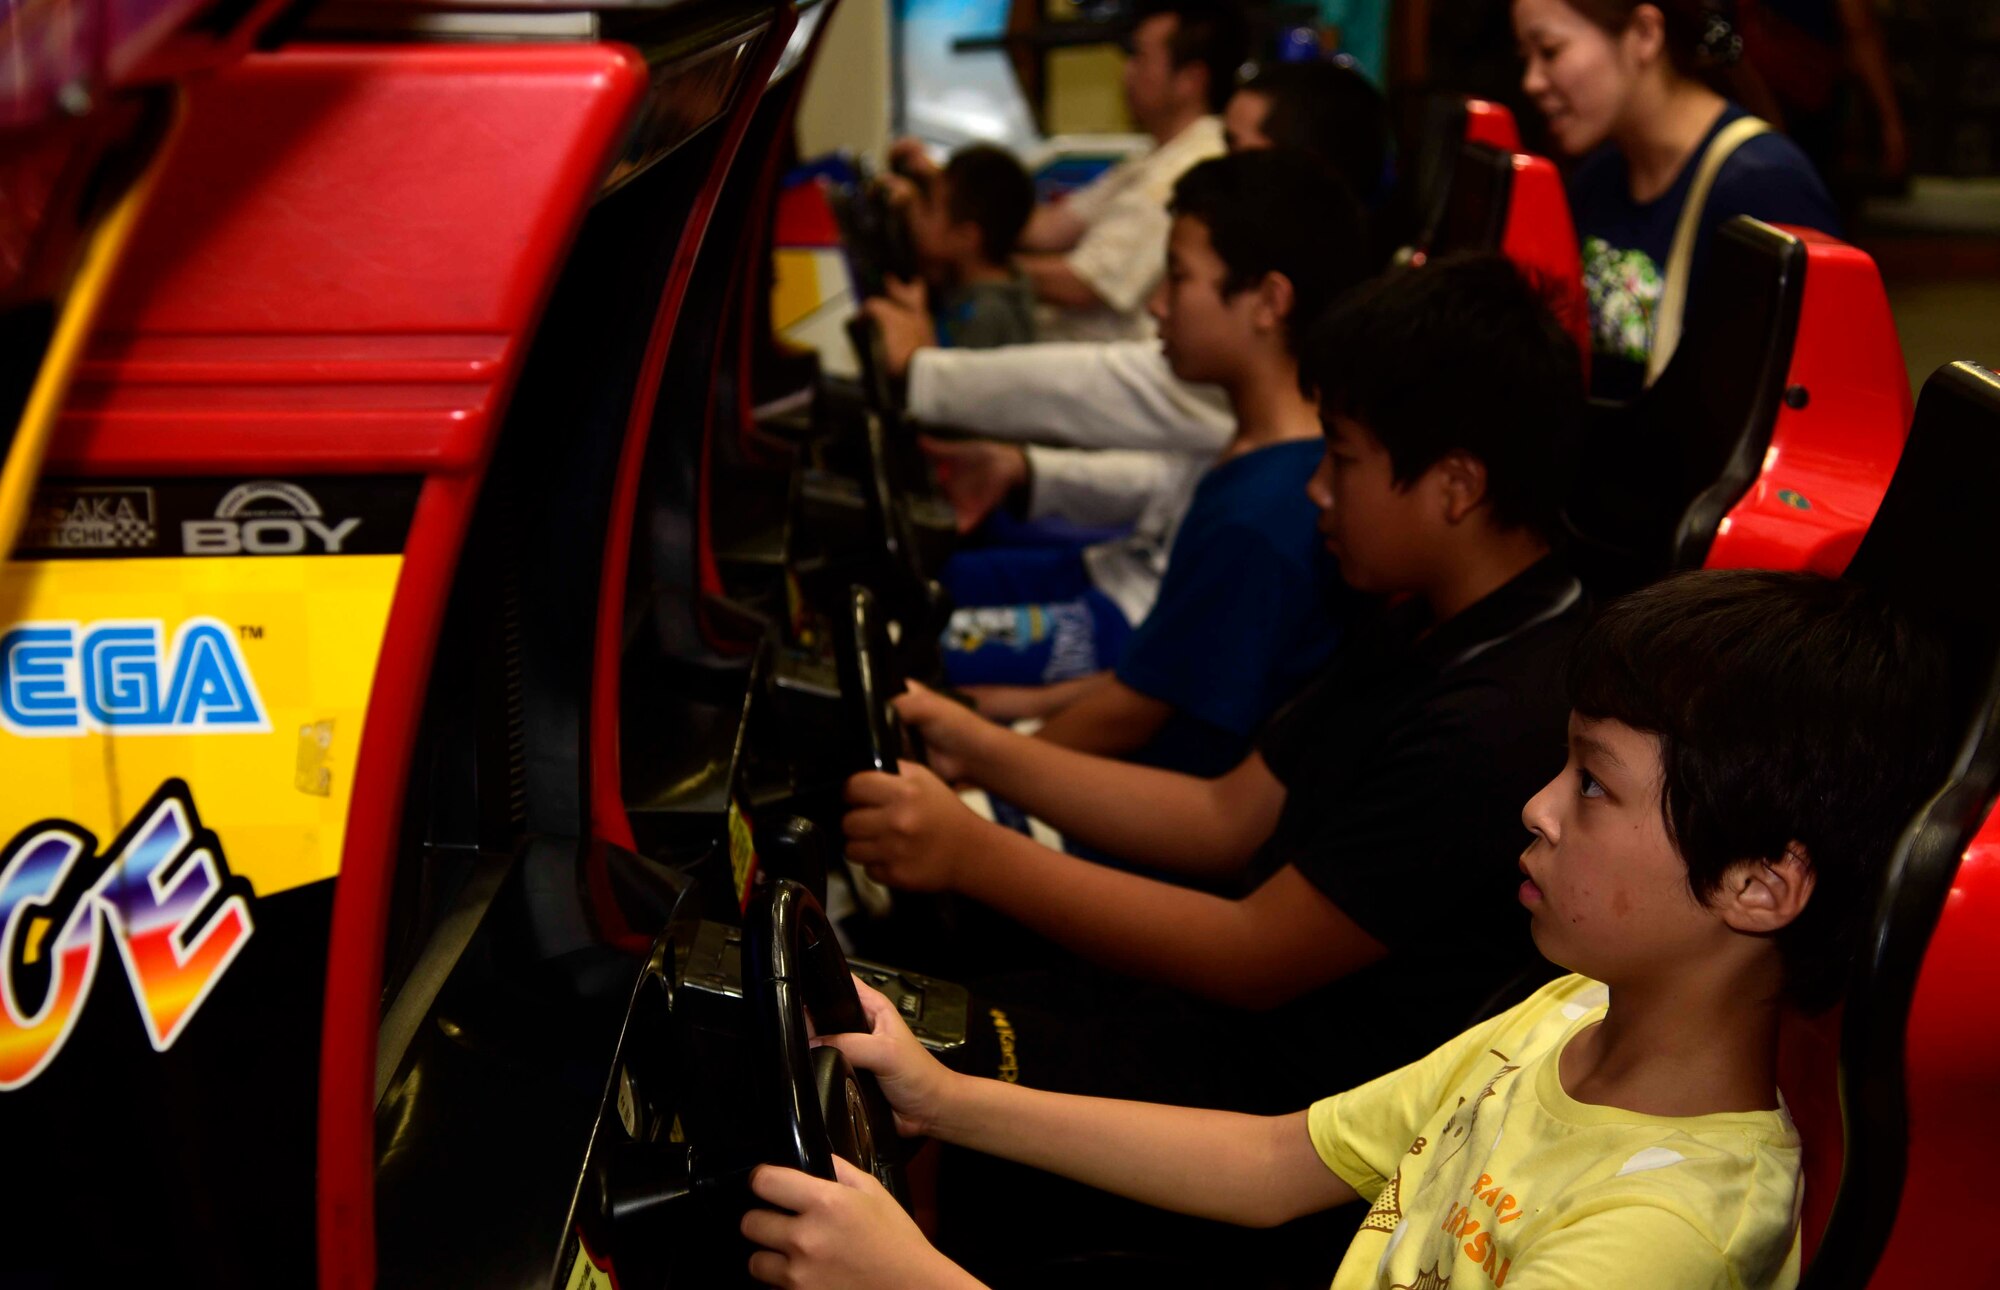 Children from the Shichinohe Children’s Home play arcade games at Misawa Air Base, Japan, July 25, 2015. Forty-five children from the home attended the "Kids of Ammo" event hosted by the 35th Maintenance Squadron munitions flight. (U.S. Air Force photo by Airman 1st Class Jordyn Fetter/Released) 
